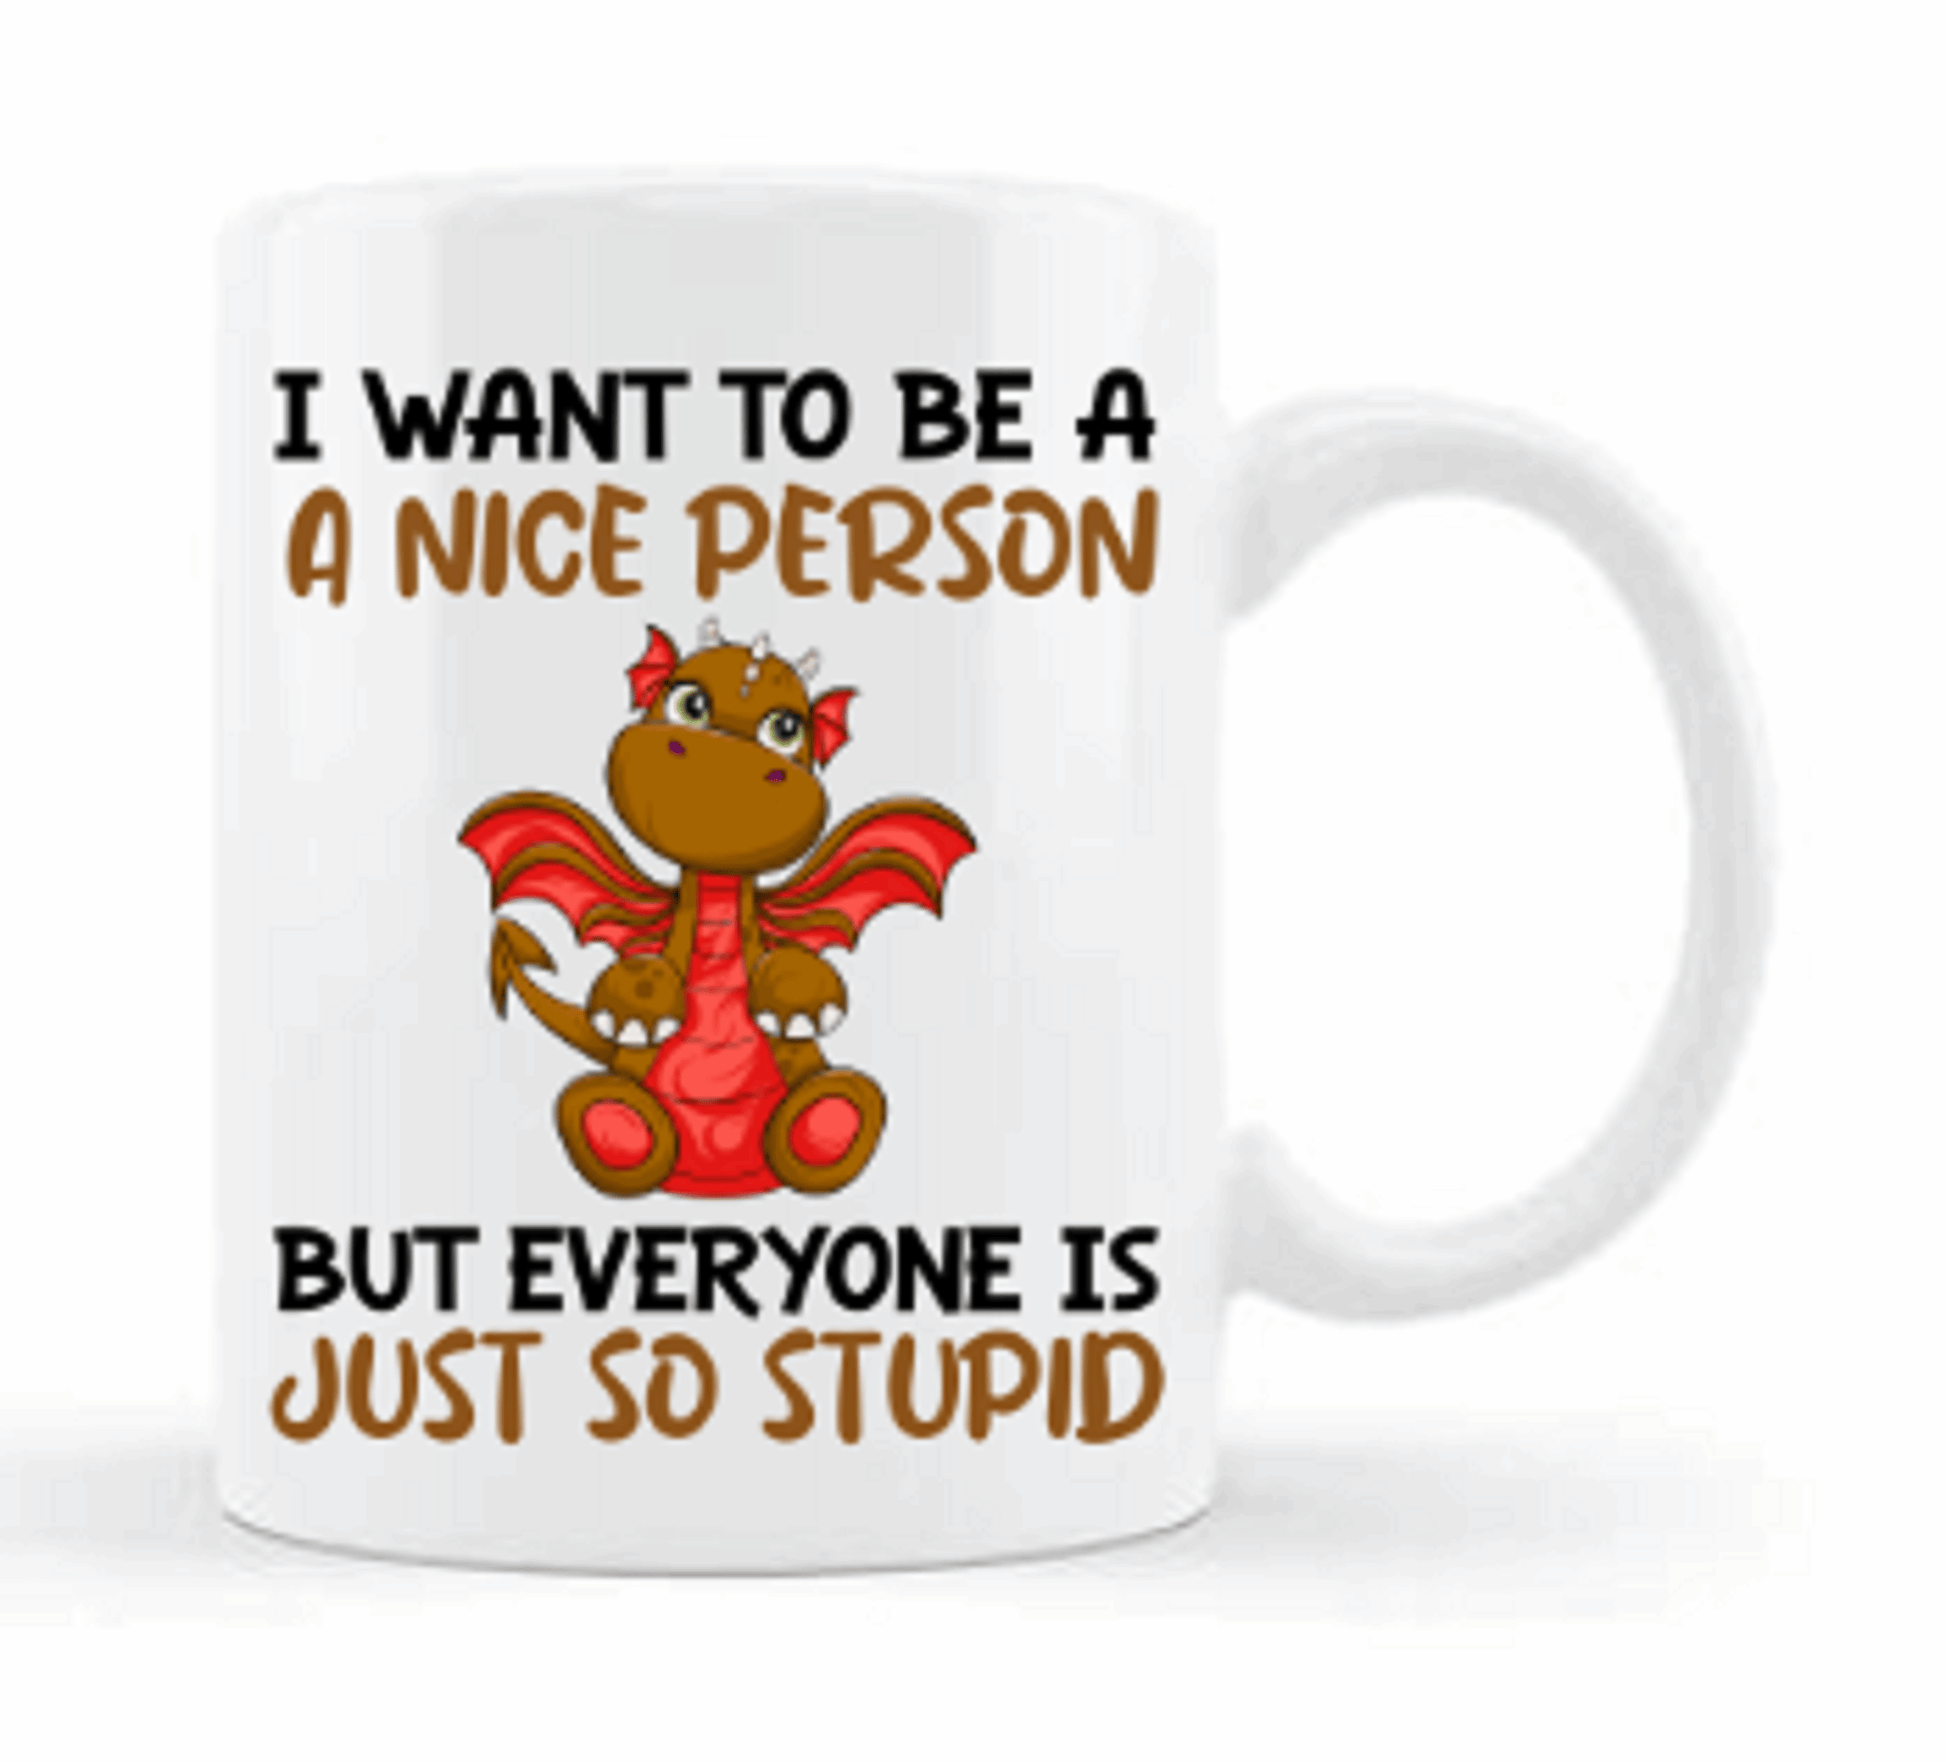  I Want To Be a Nice Person Funny Dragon Mug by Free Spirit Accessories sold by Free Spirit Accessories